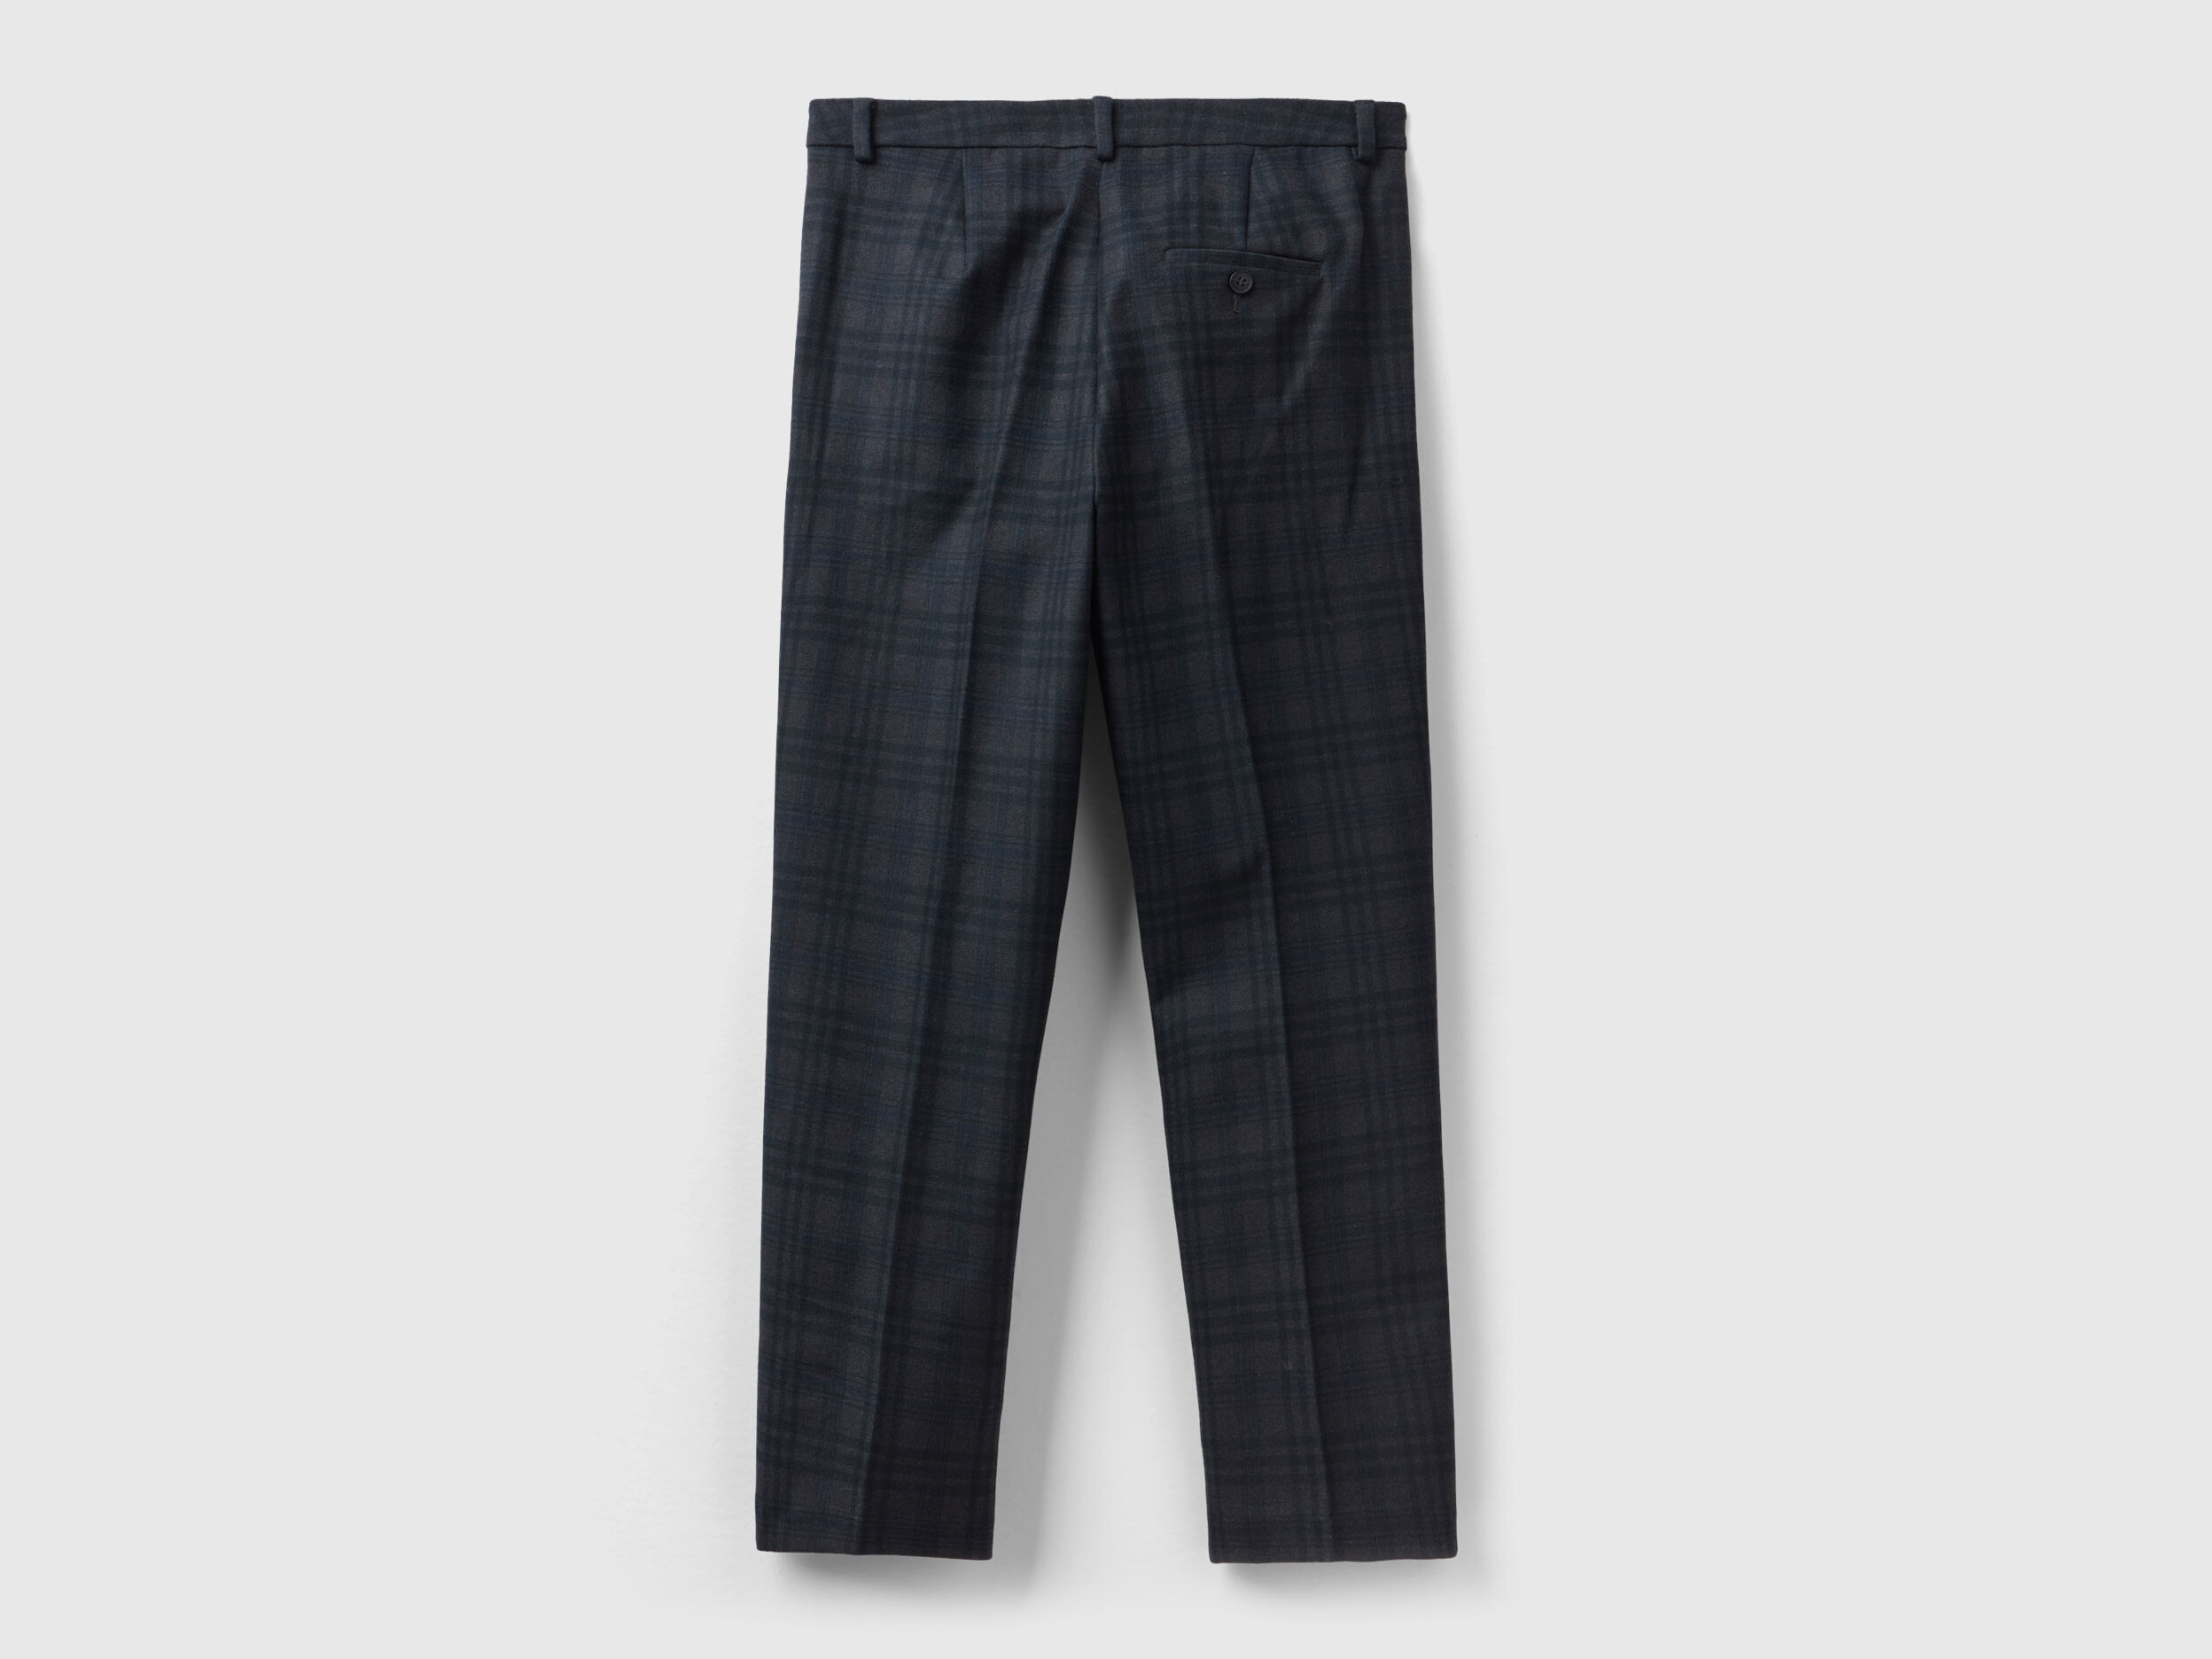 River Island super skinny checked trousers in grey | ASOS